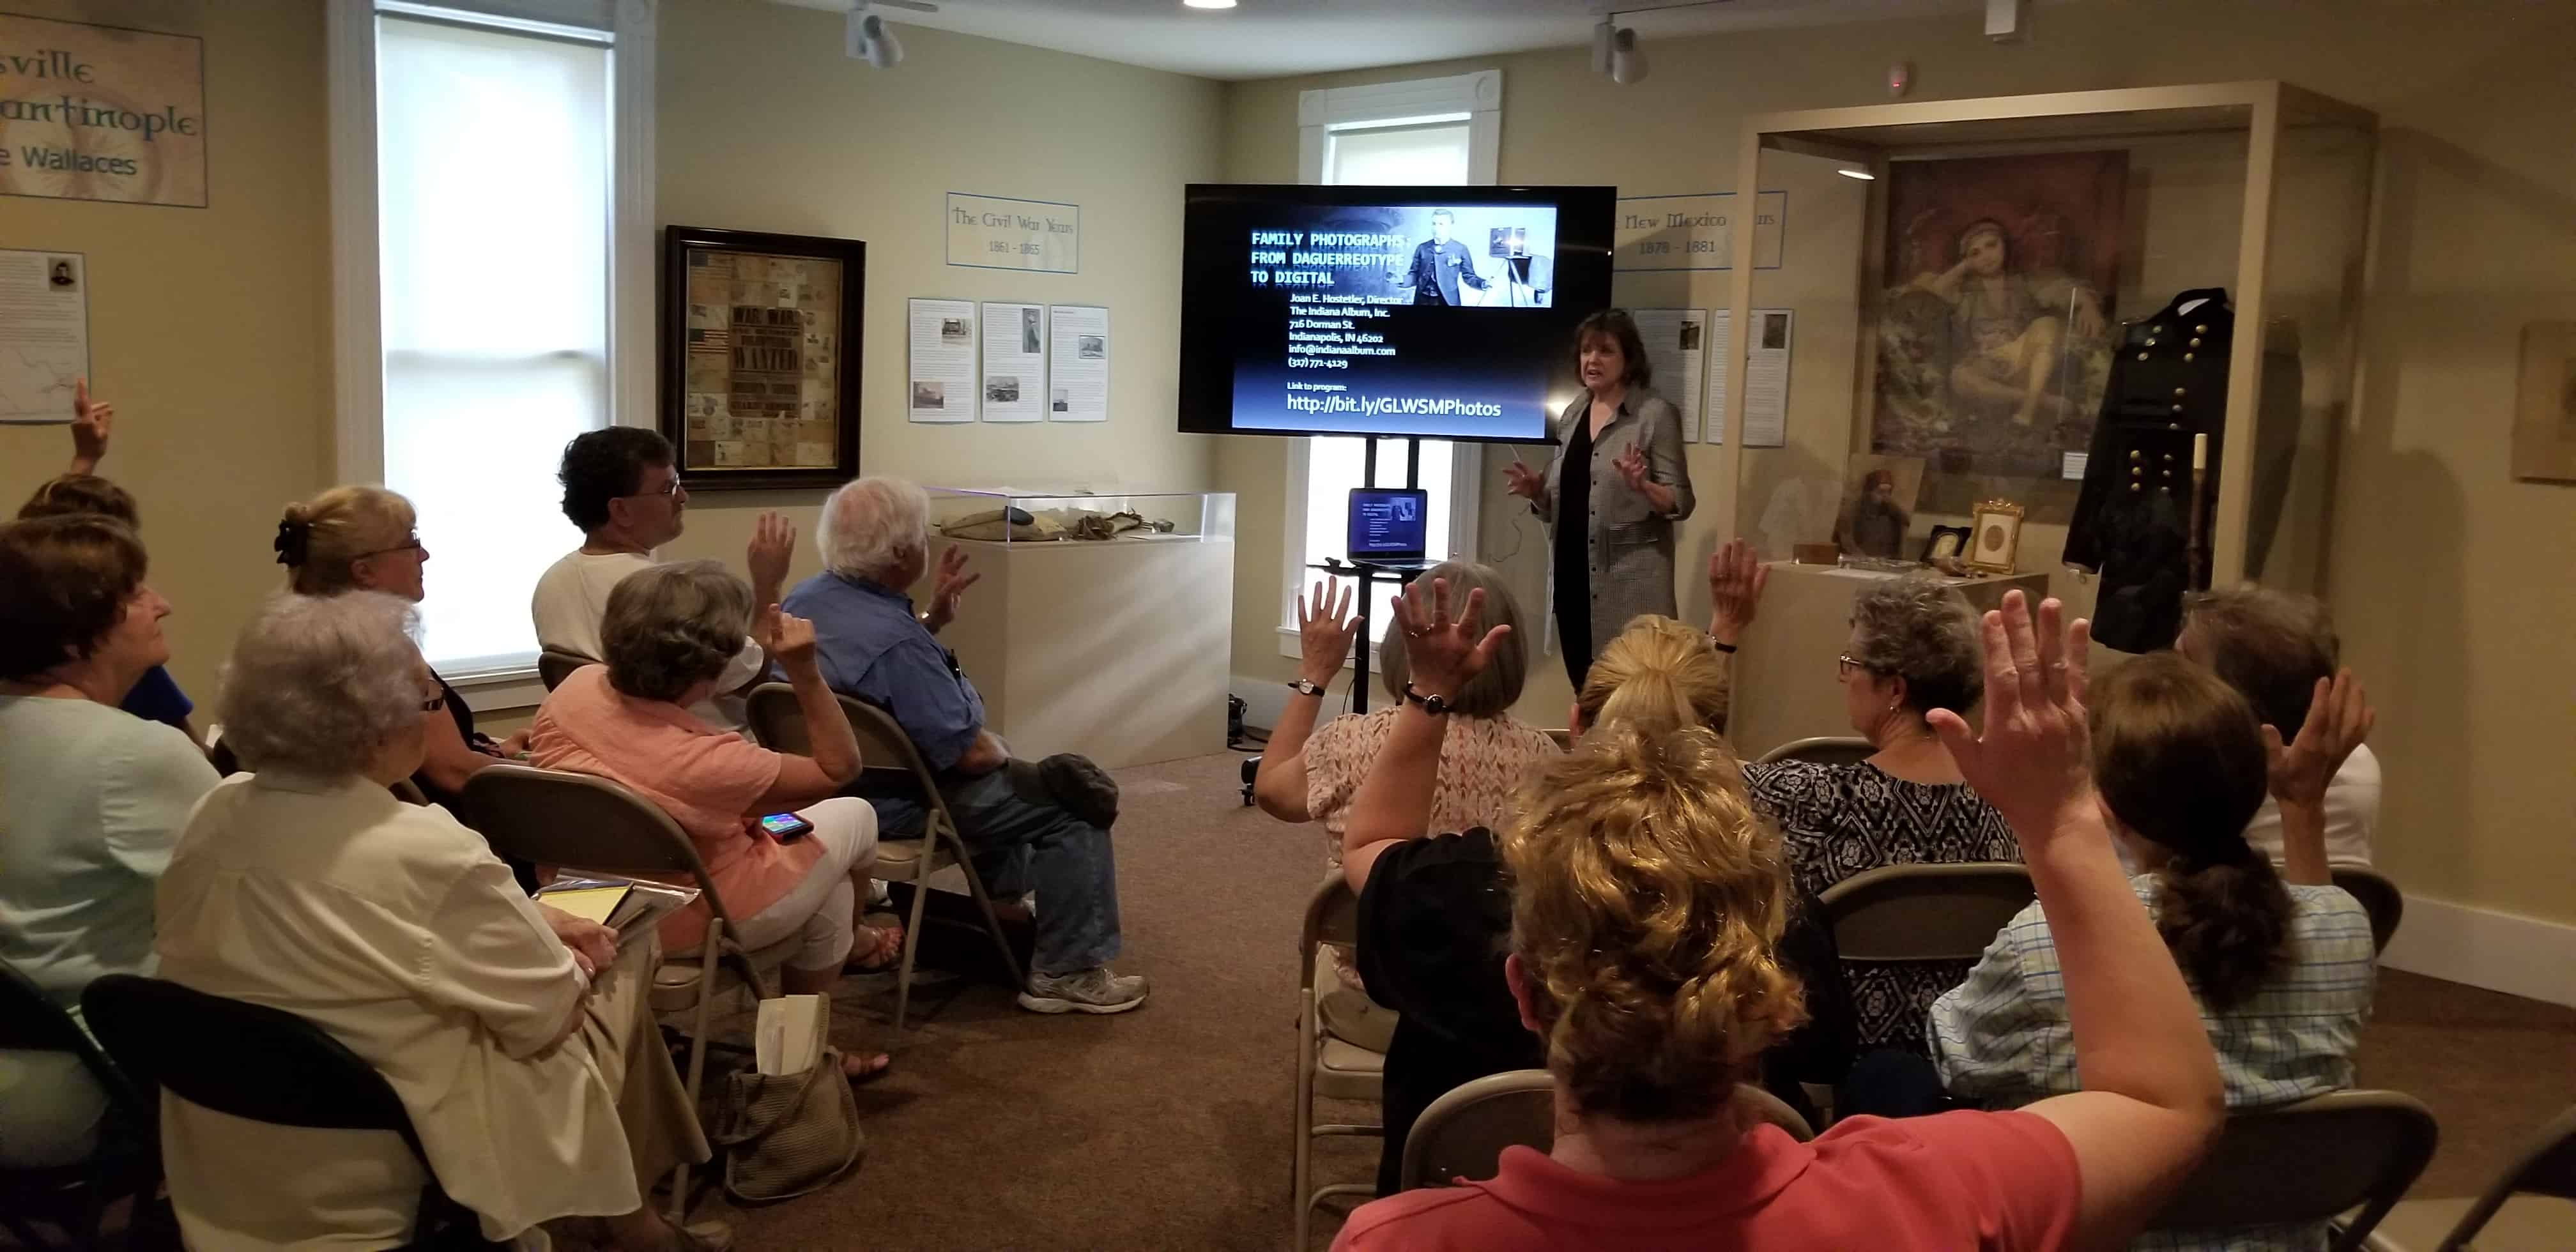 Joan Hostetler gives an historic photo lecture to a group in the Carriage House